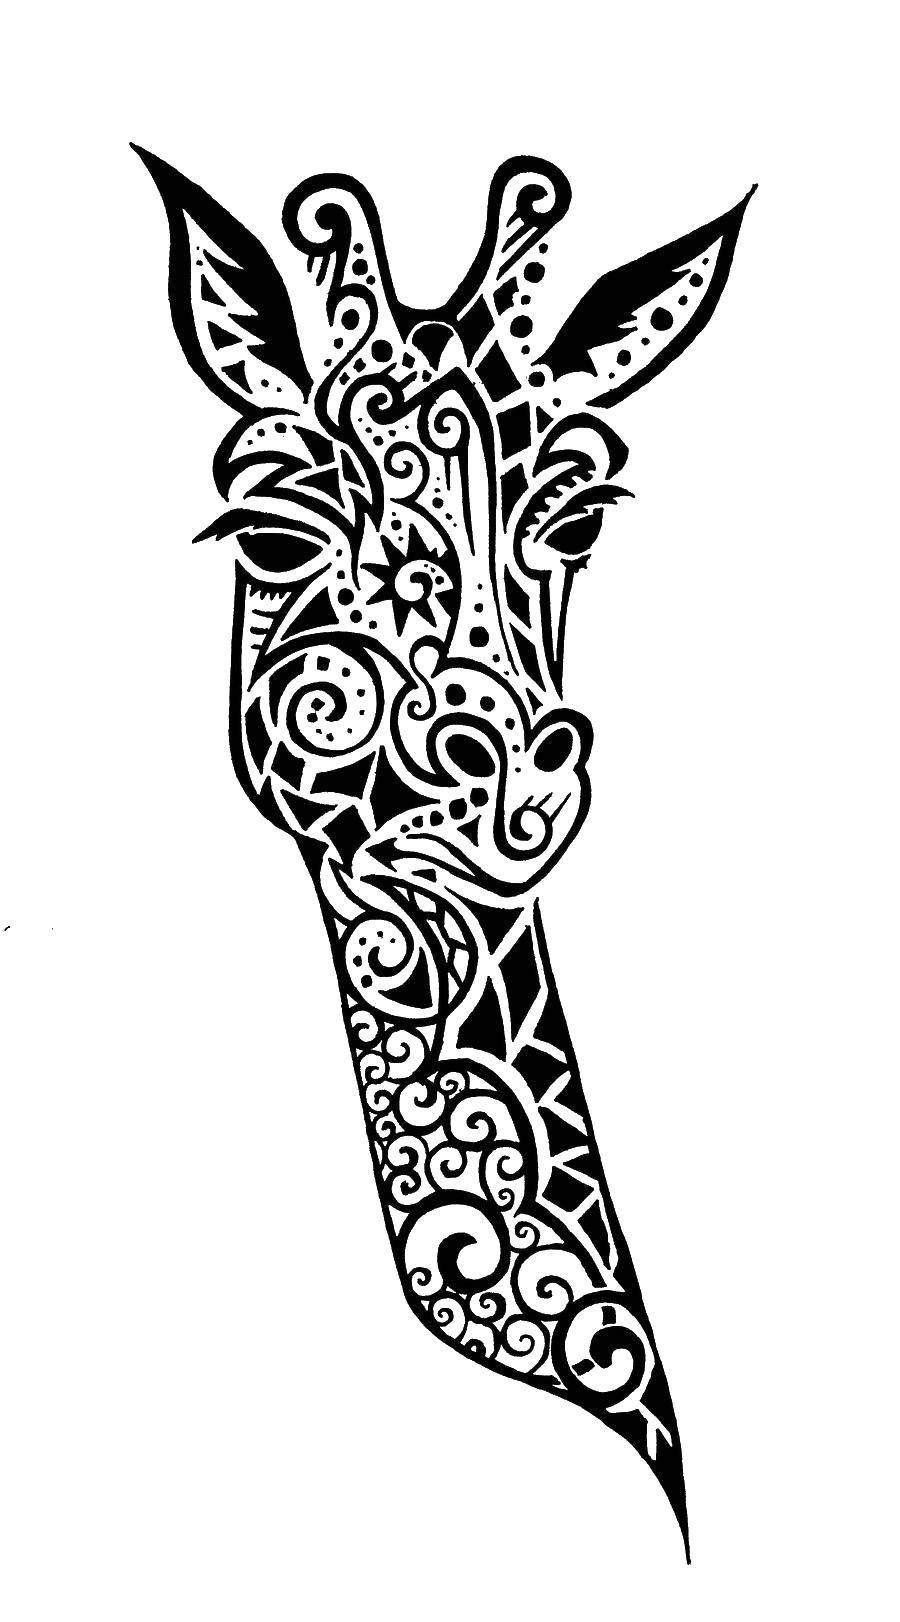 Coloring Patterned giraffe. Category The outline of a giraffe for cutting. Tags:  Animals, giraffe.